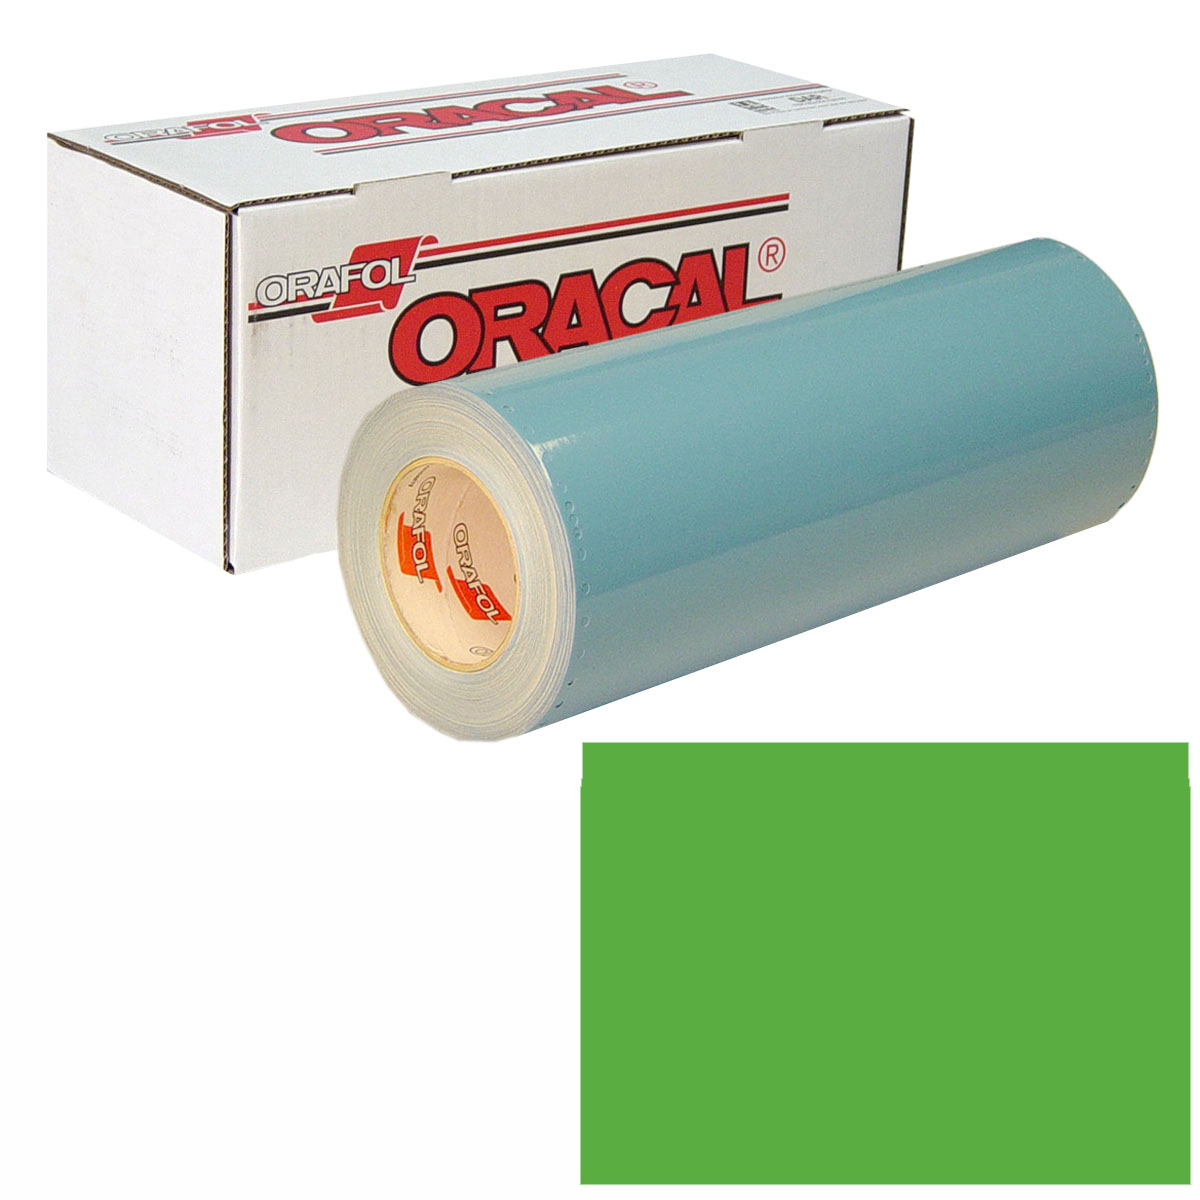 ORACAL 751 15in X 50yd 063 Lime-Tree Green